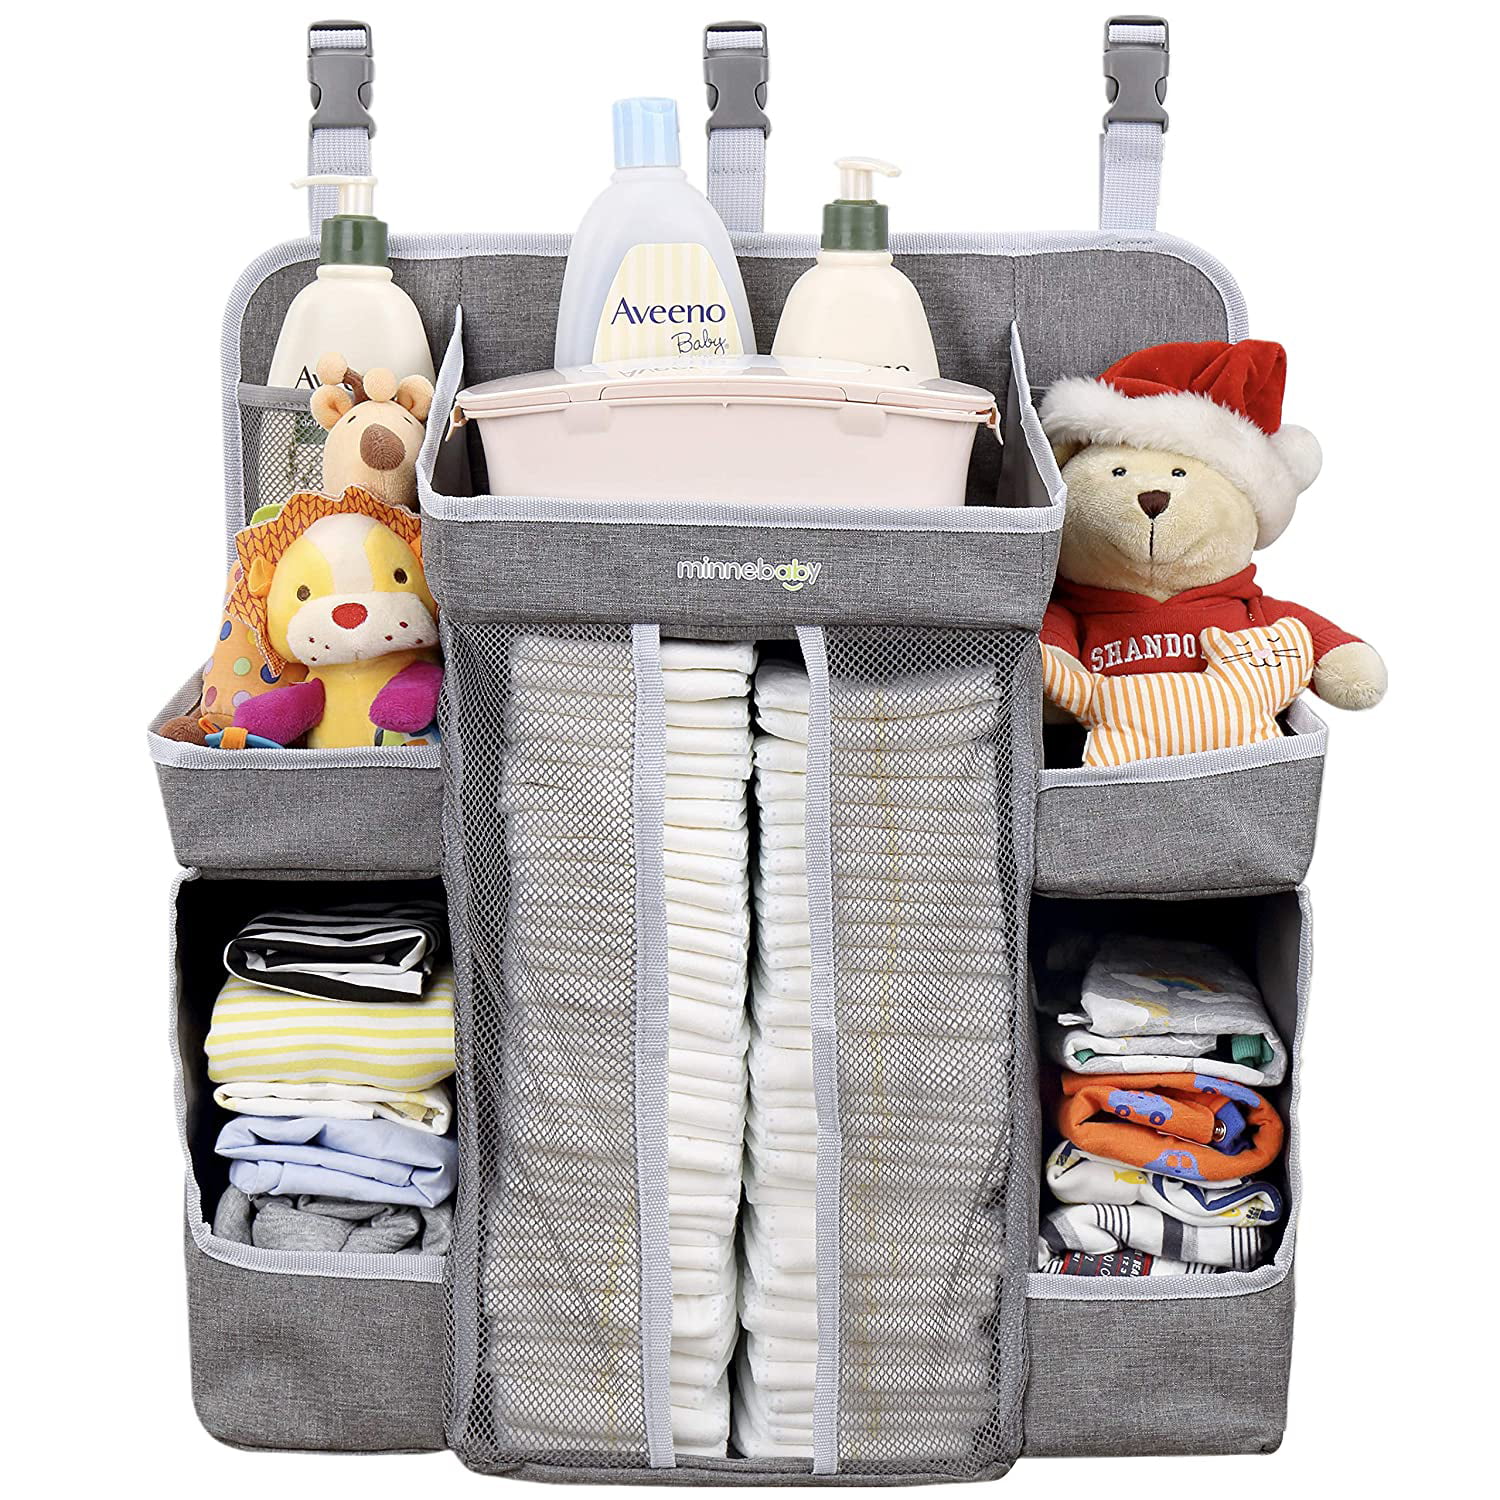 Baby Shower Gifts for Newborn, Playard Nursery Organizer Hanging Diaper Caddy Organizer Crib Baby Diaper Caddy Nursery Organizer Large, Grey Diaper Stacker for Changing Table 